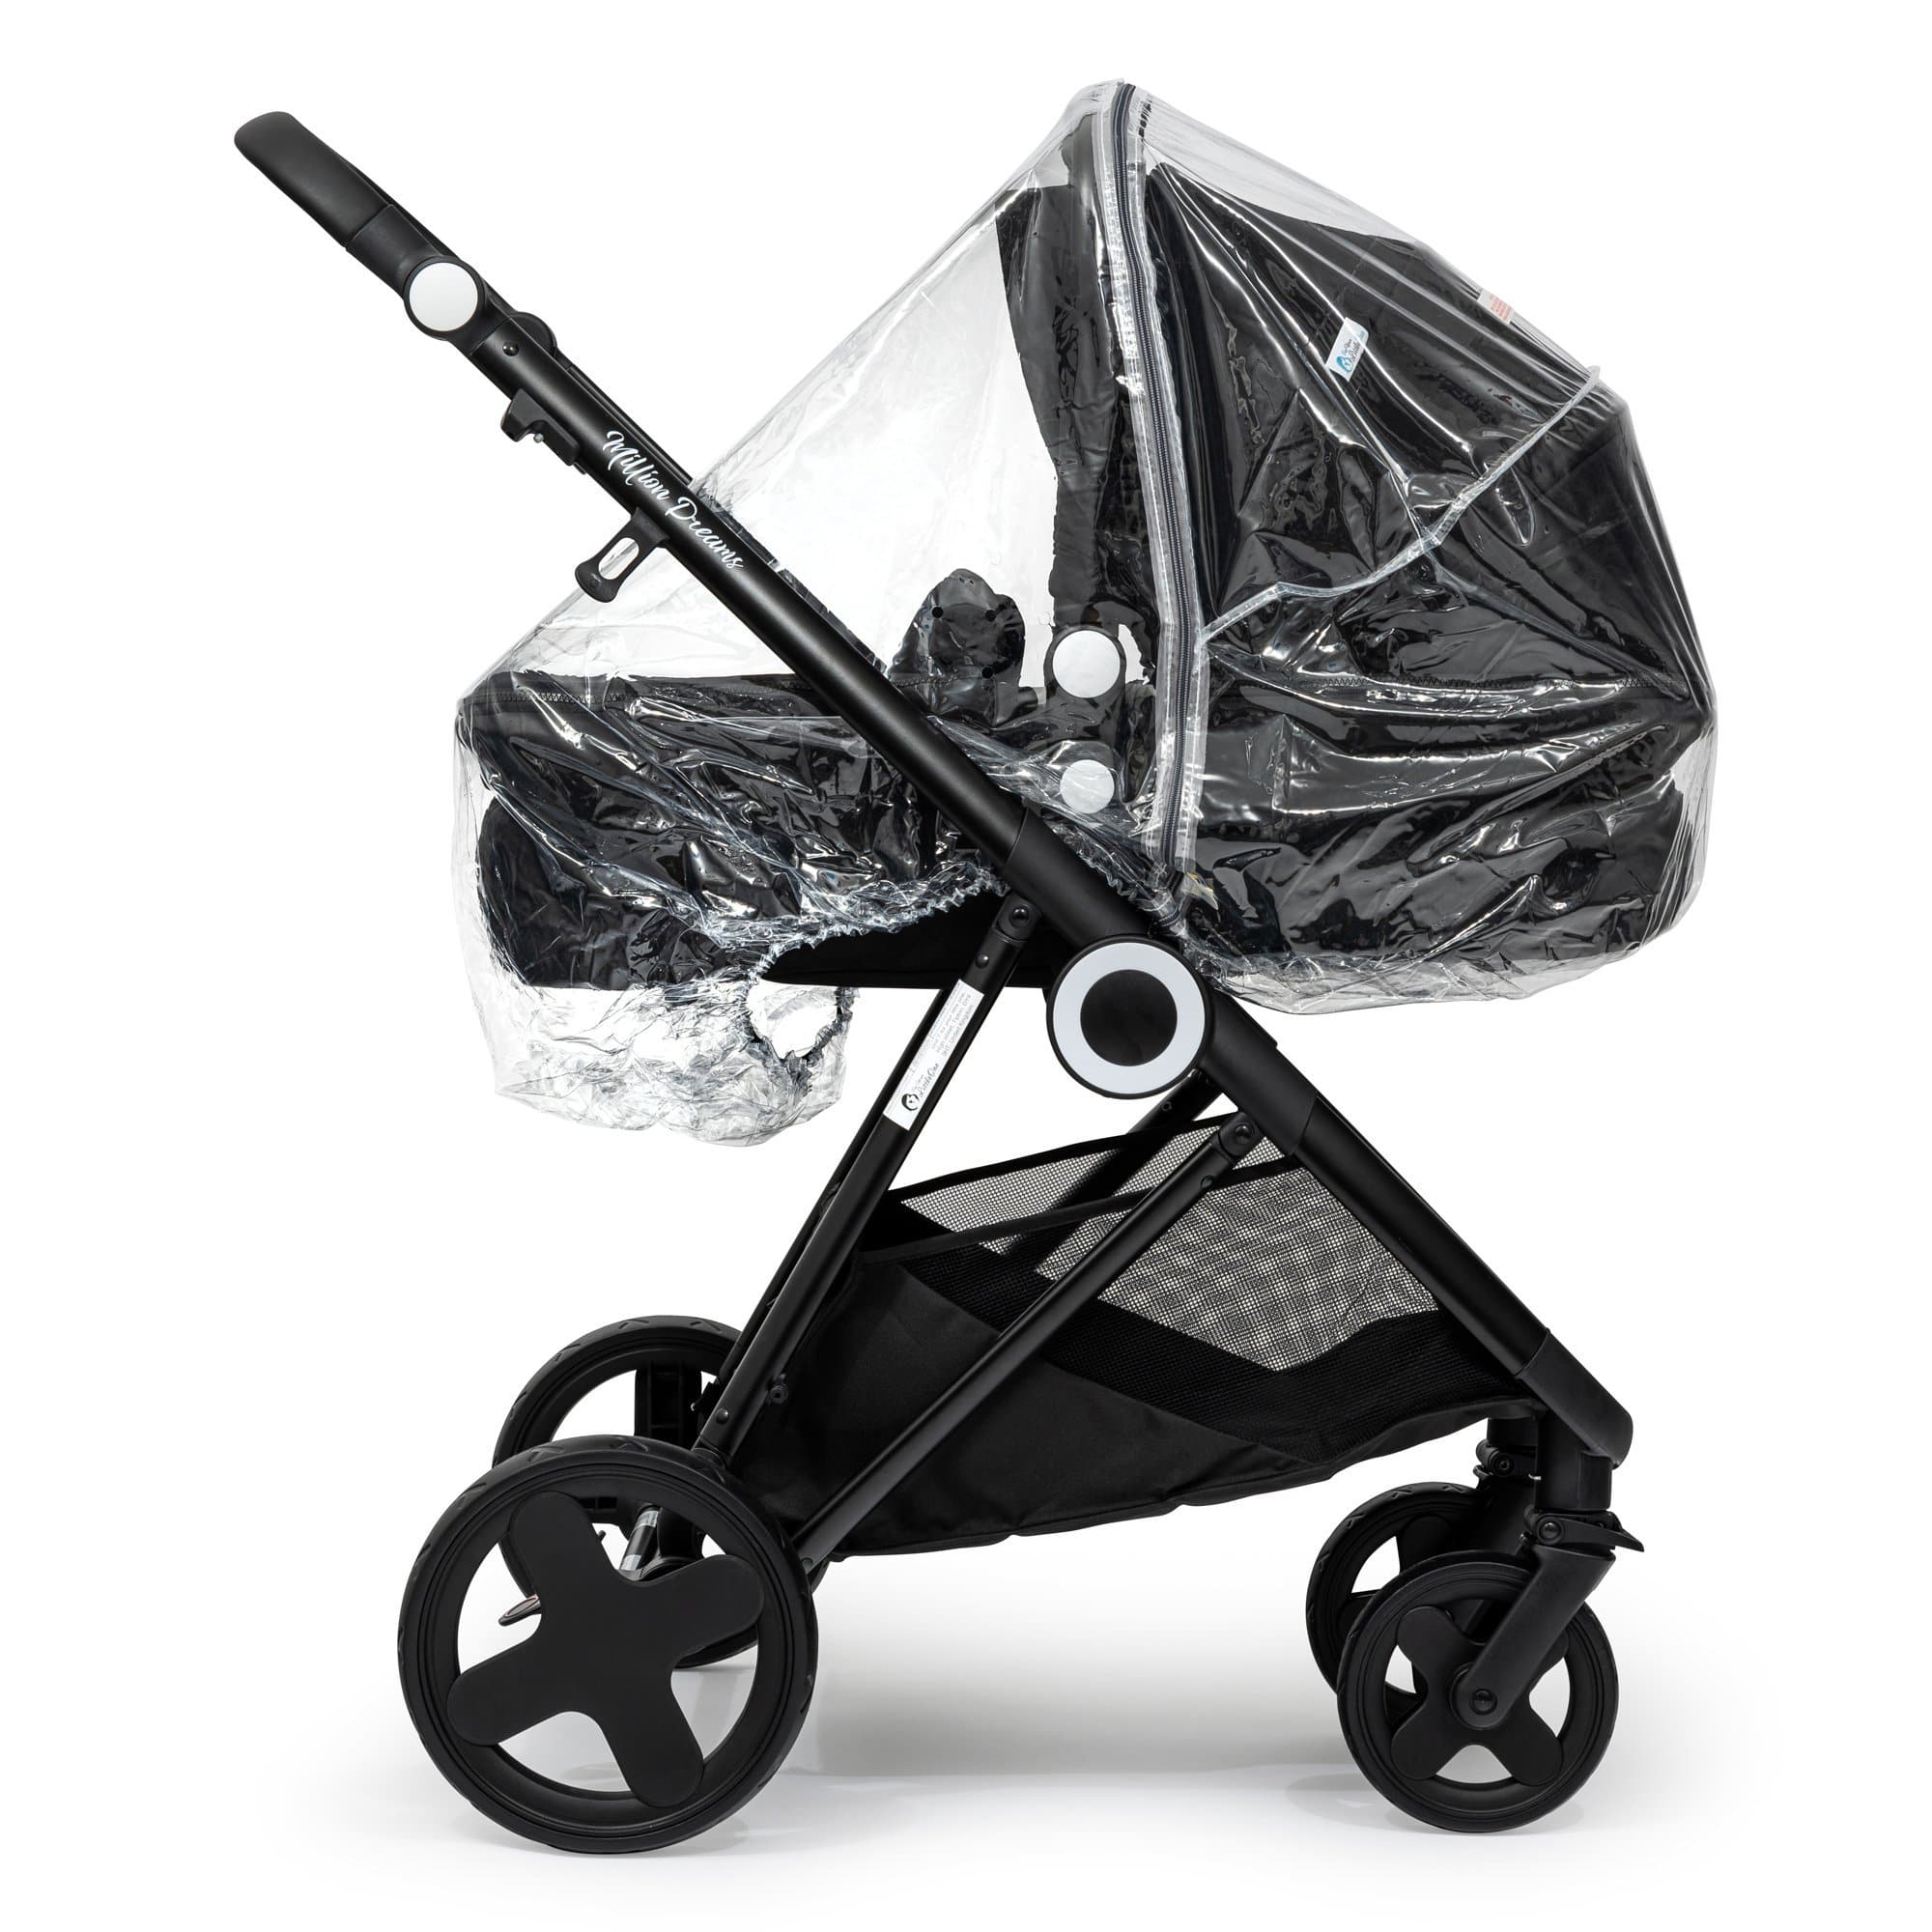 2 in 1 Rain Cover Compatible with Casual - Fits All Models - For Your Little One